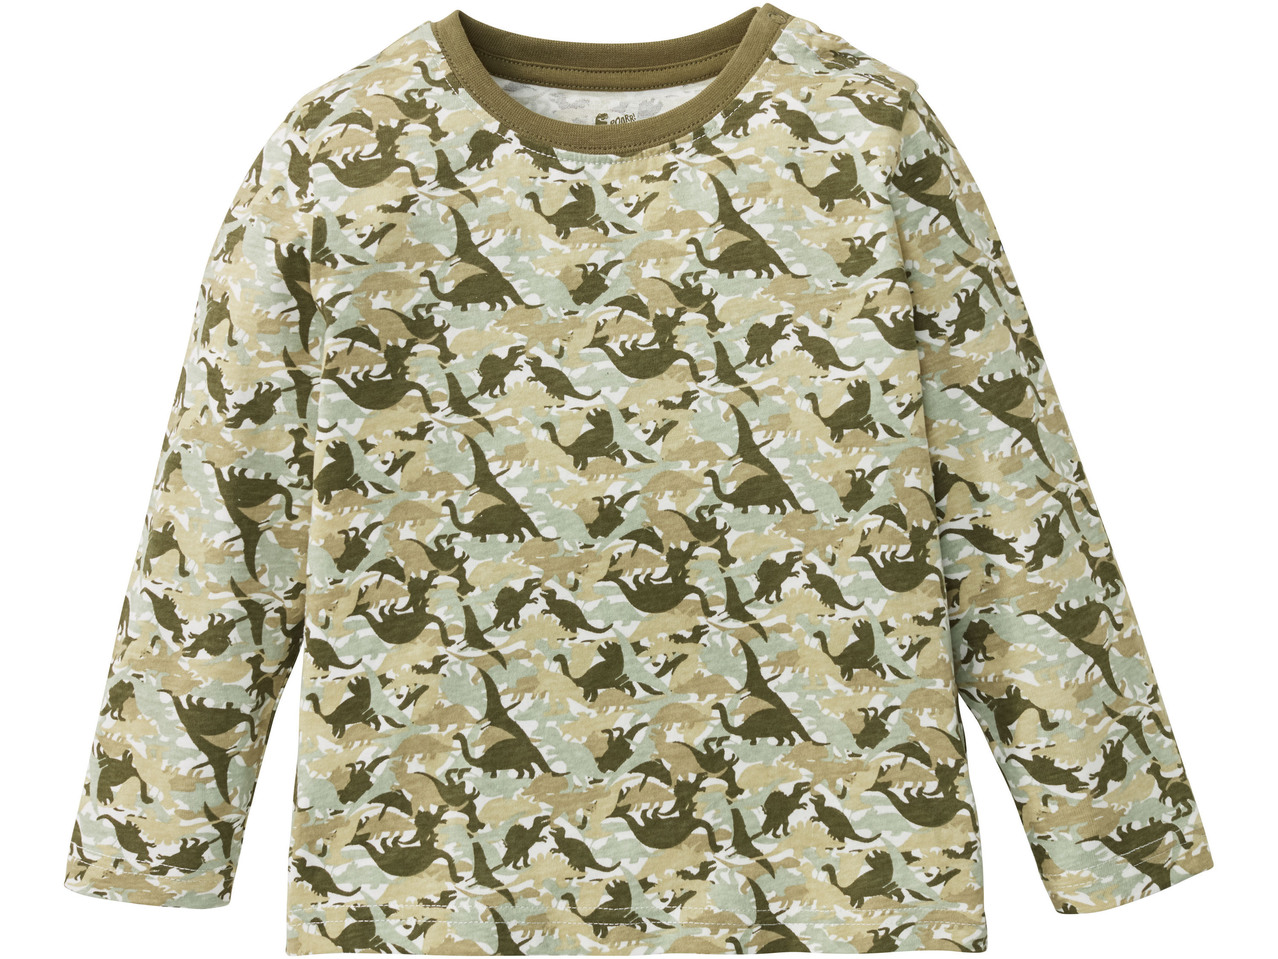 Boys' Long-Sleeved Tops, 2 pieces